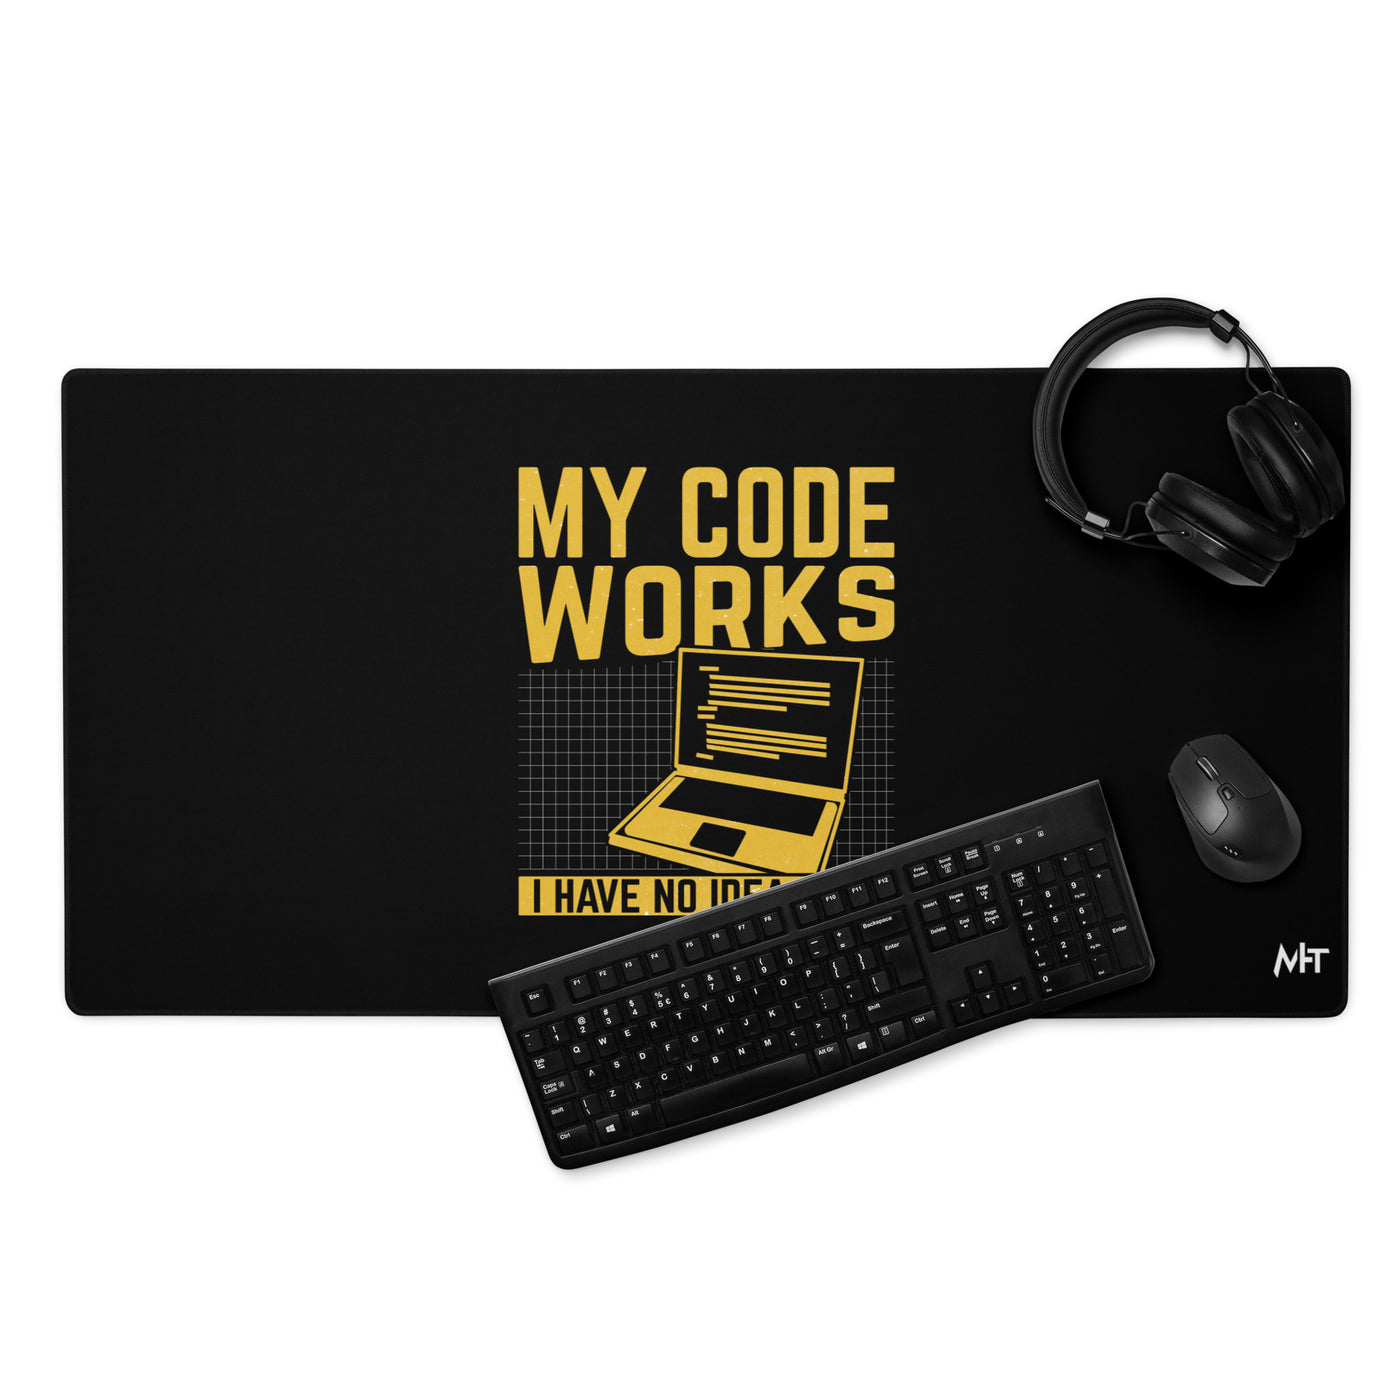 My Code works, I have no Idea why - Desk Mat